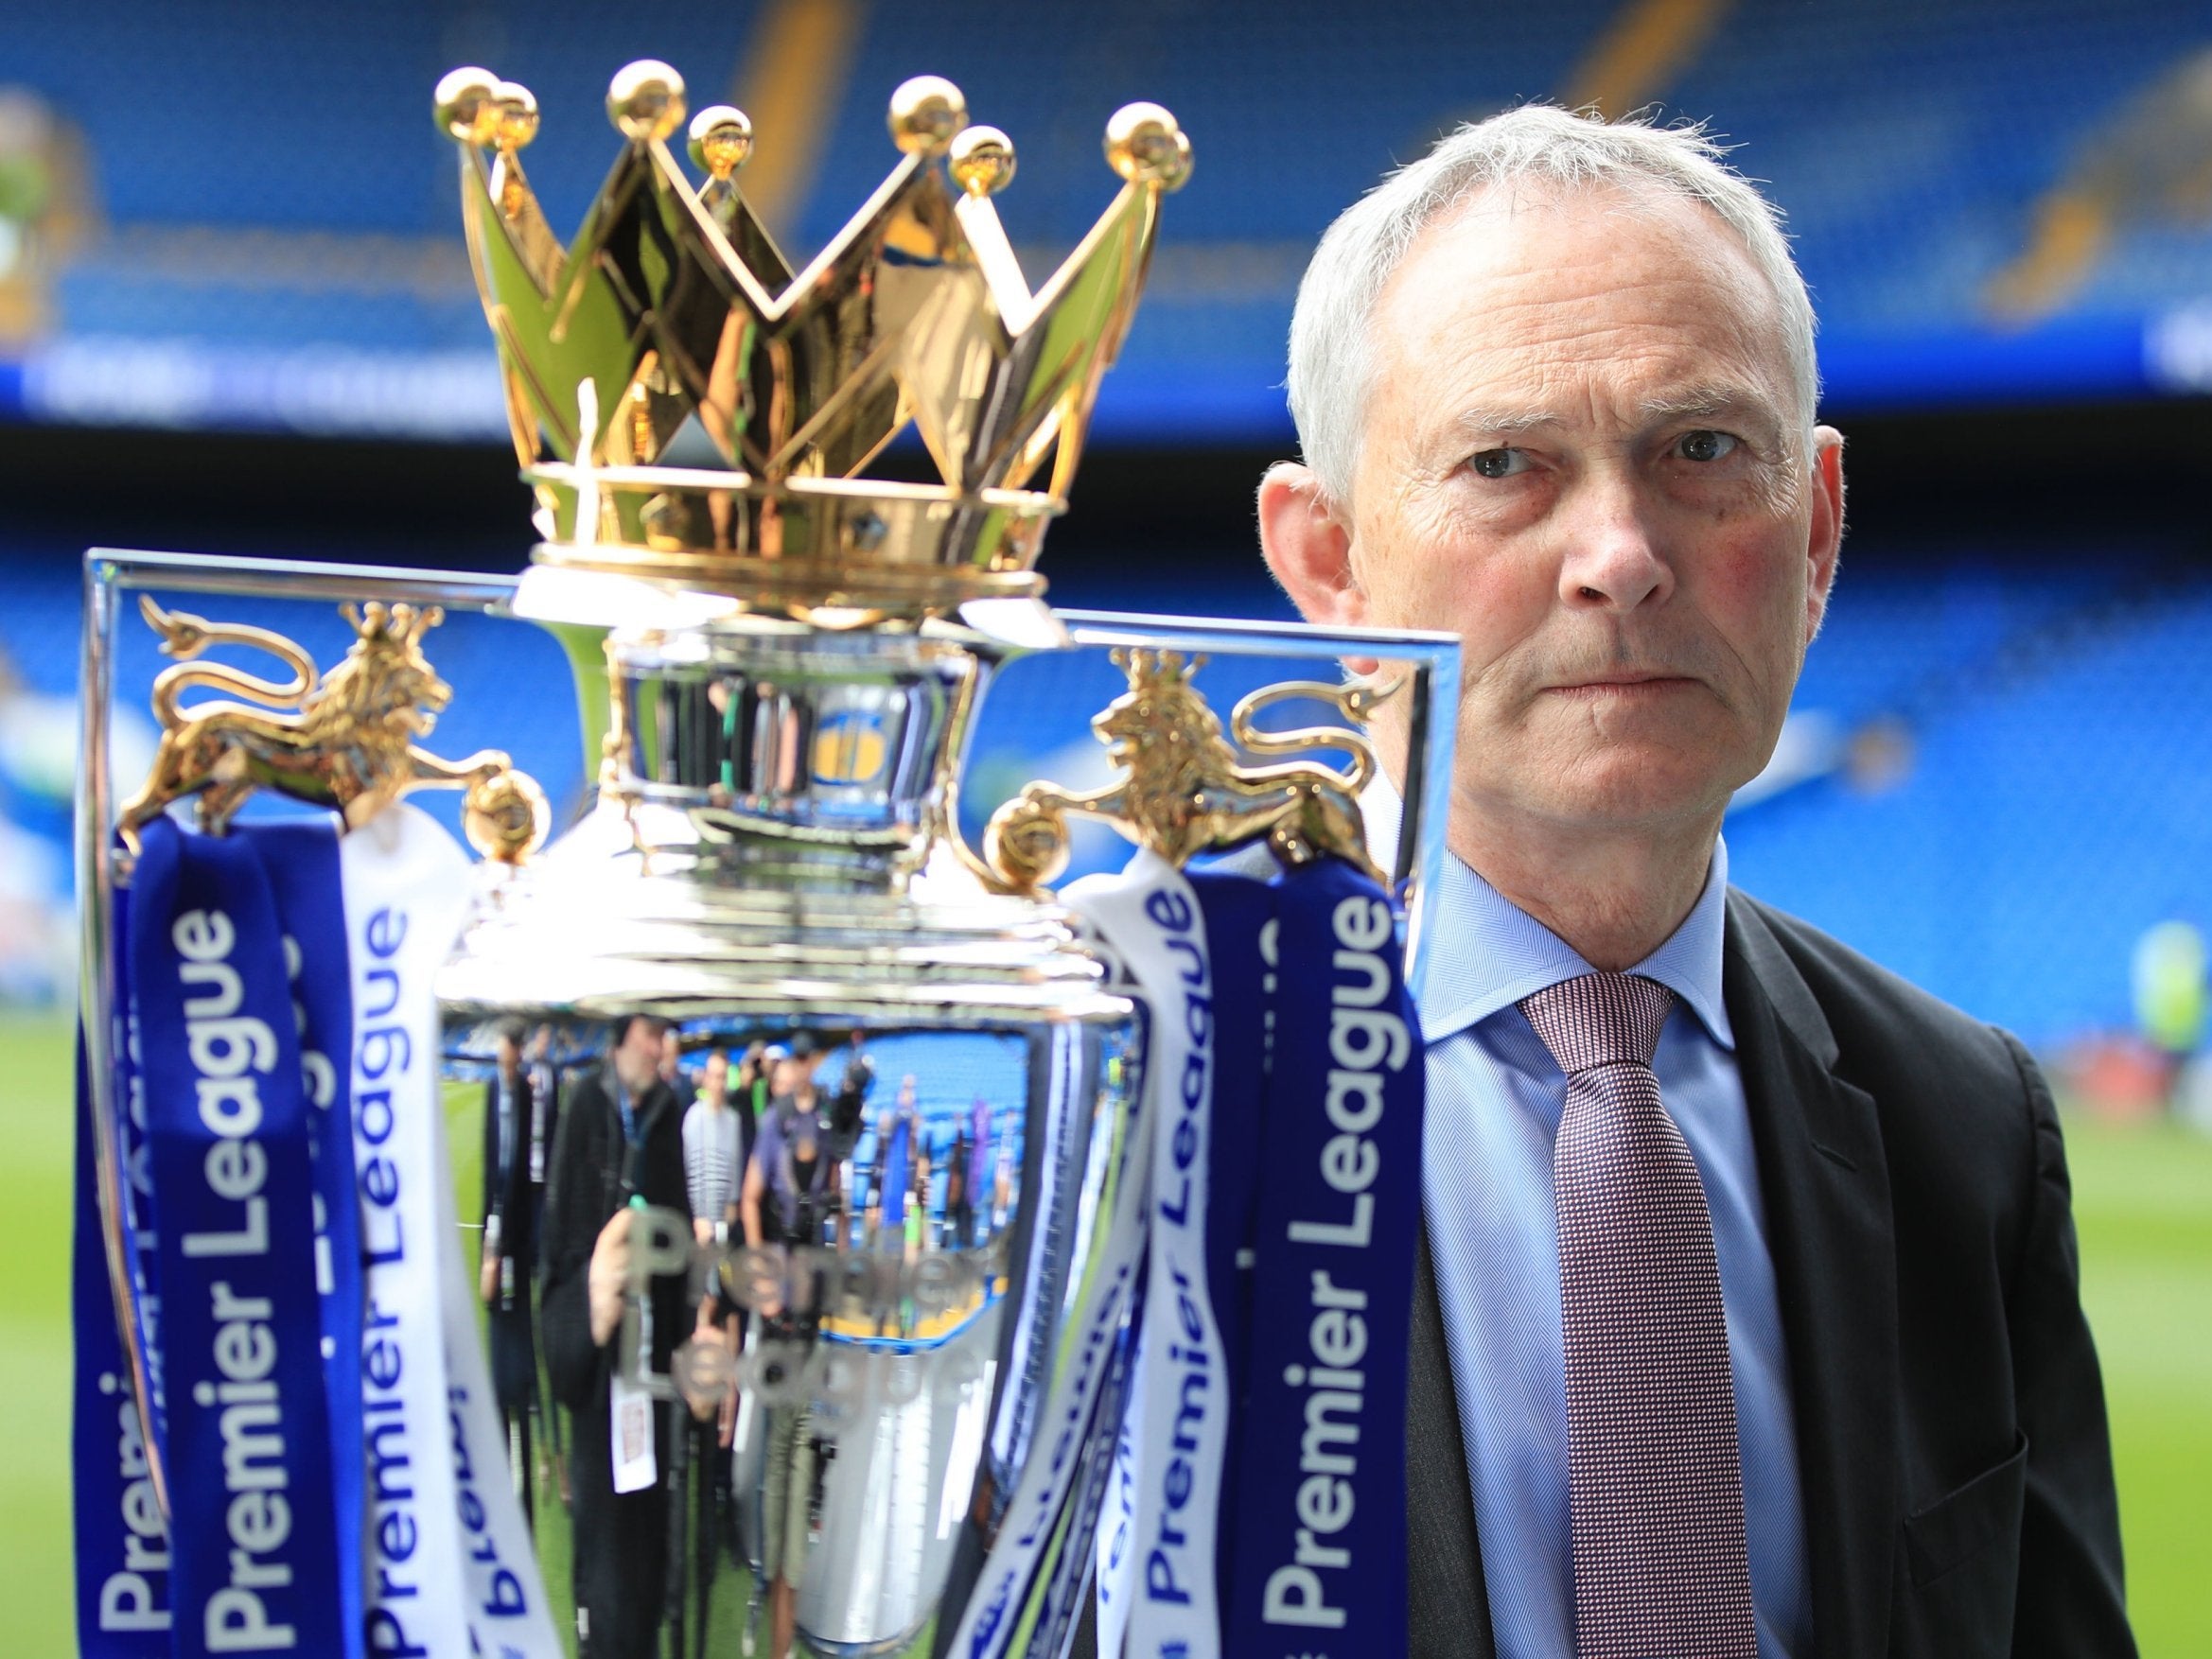 In 2016 the British electorate took a look at the openness Premier League chief executive Richard Scudamore celebrated, and decided to close it up instead